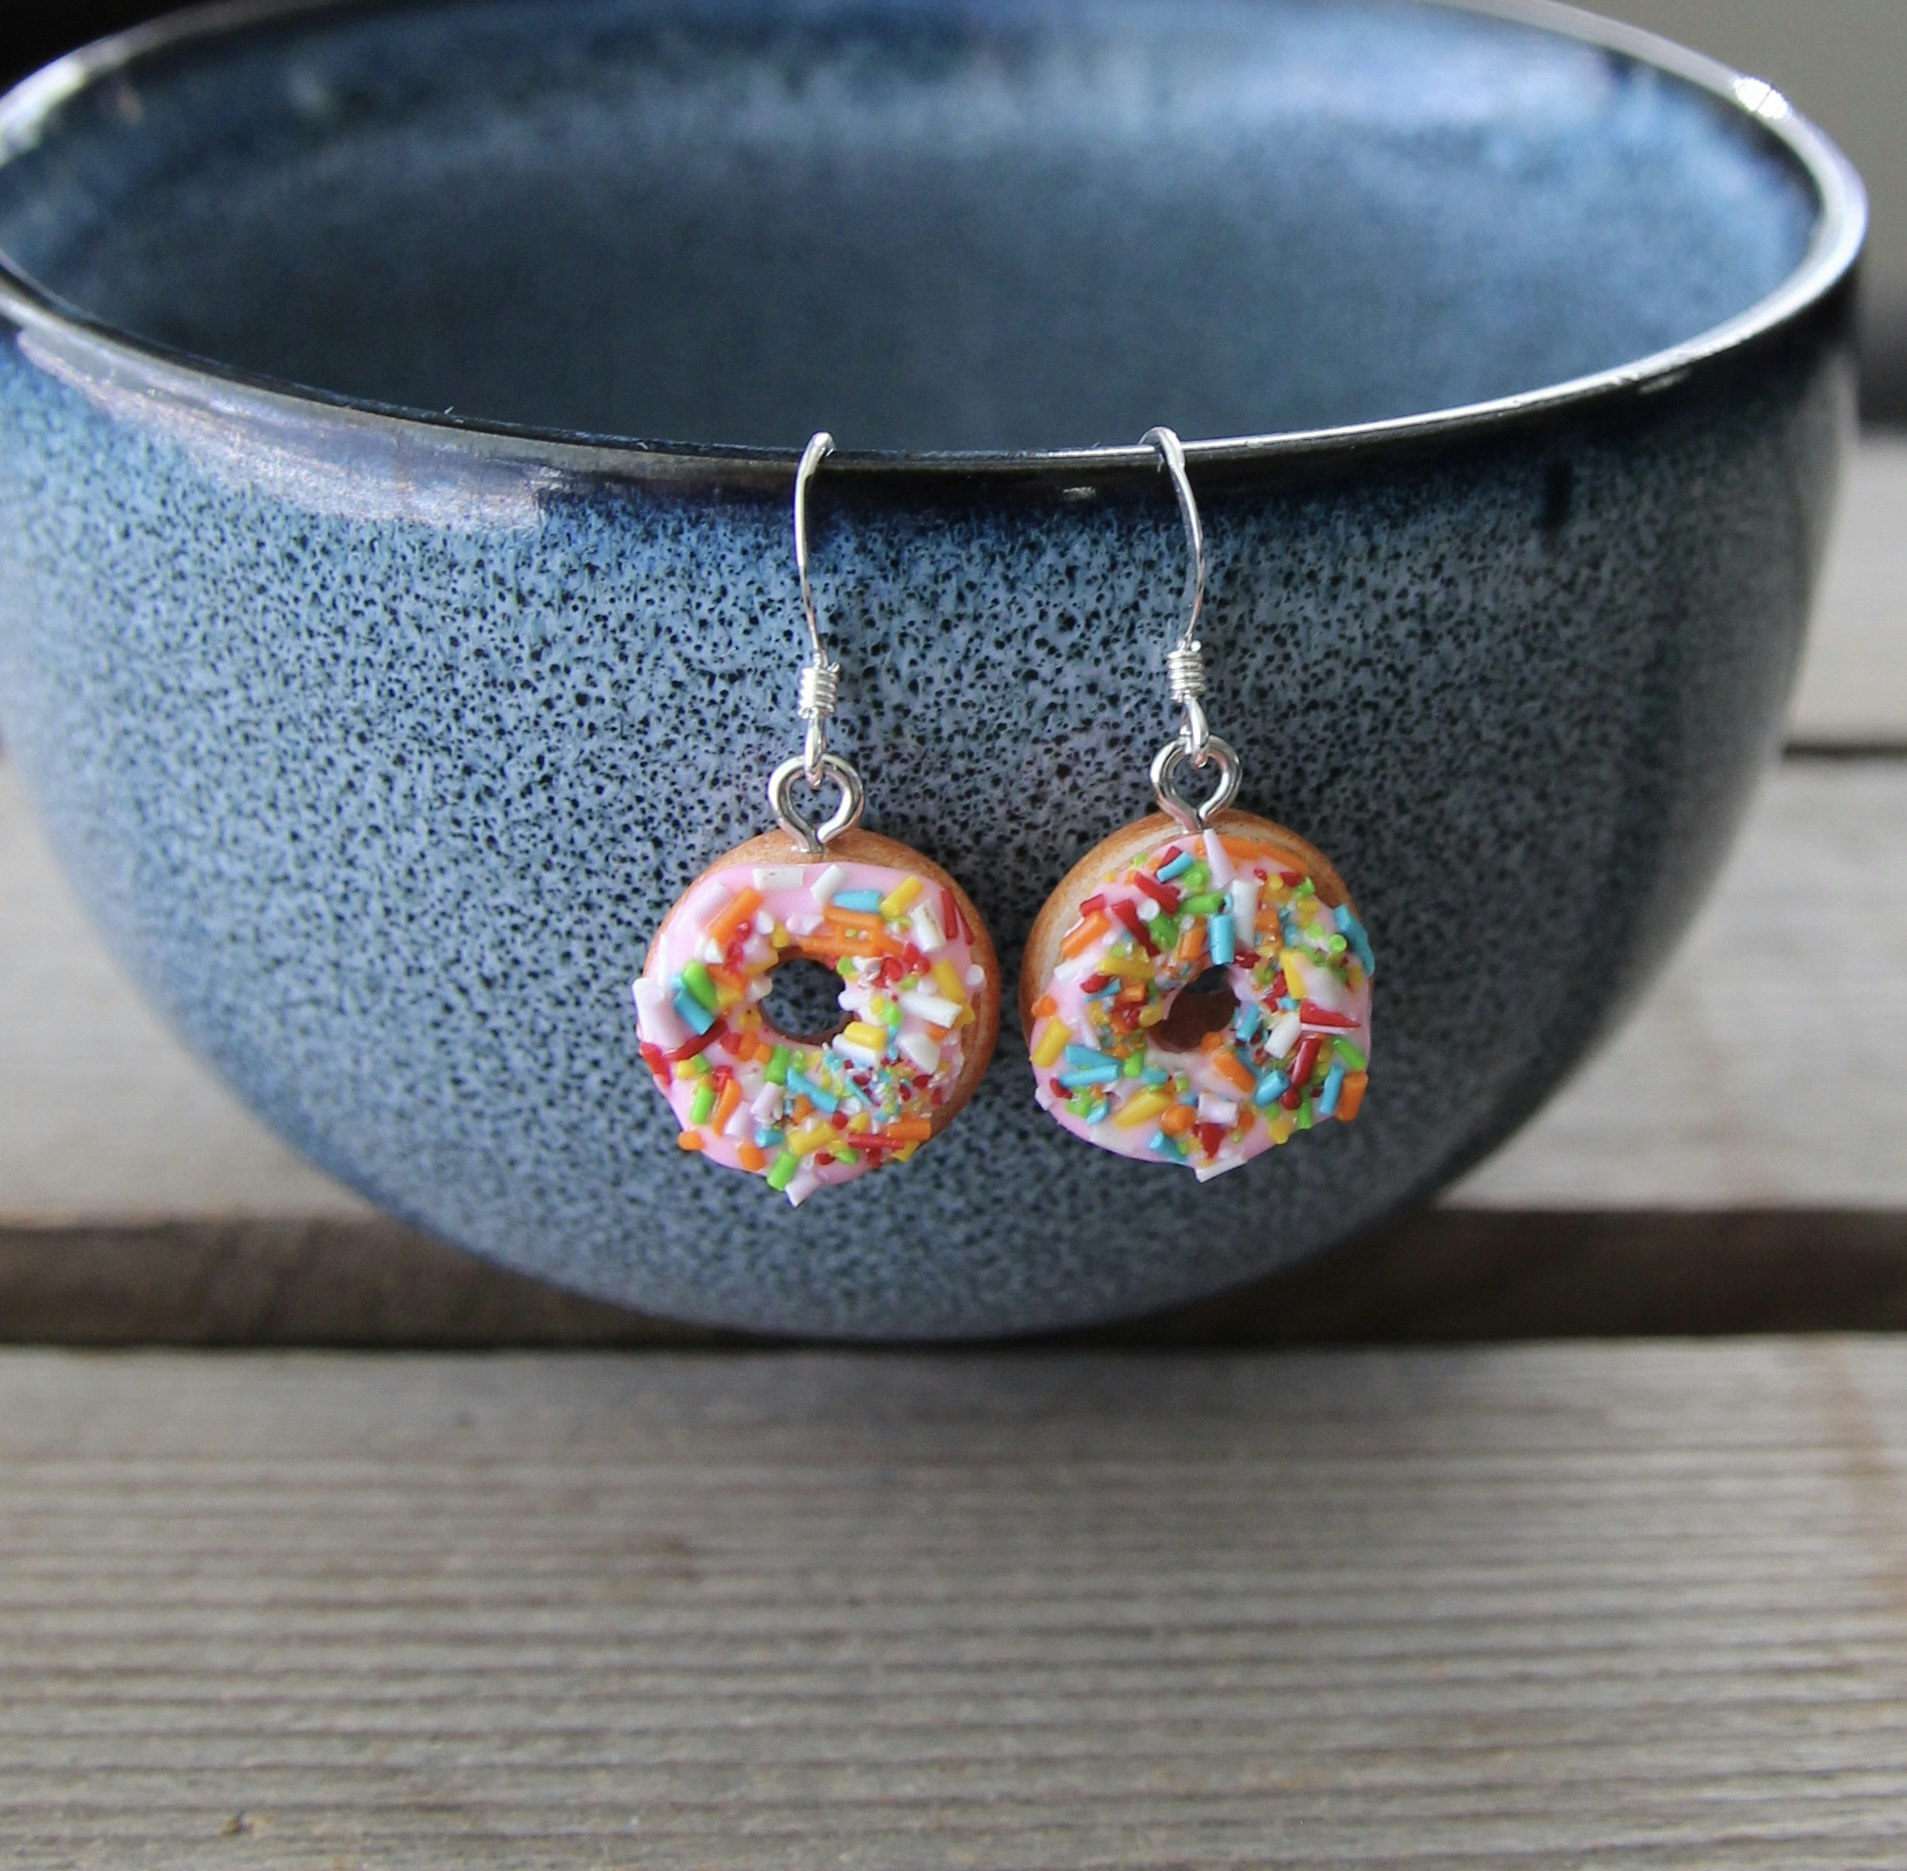 Earrings, donuts with pink icing and sprinkles without a bite